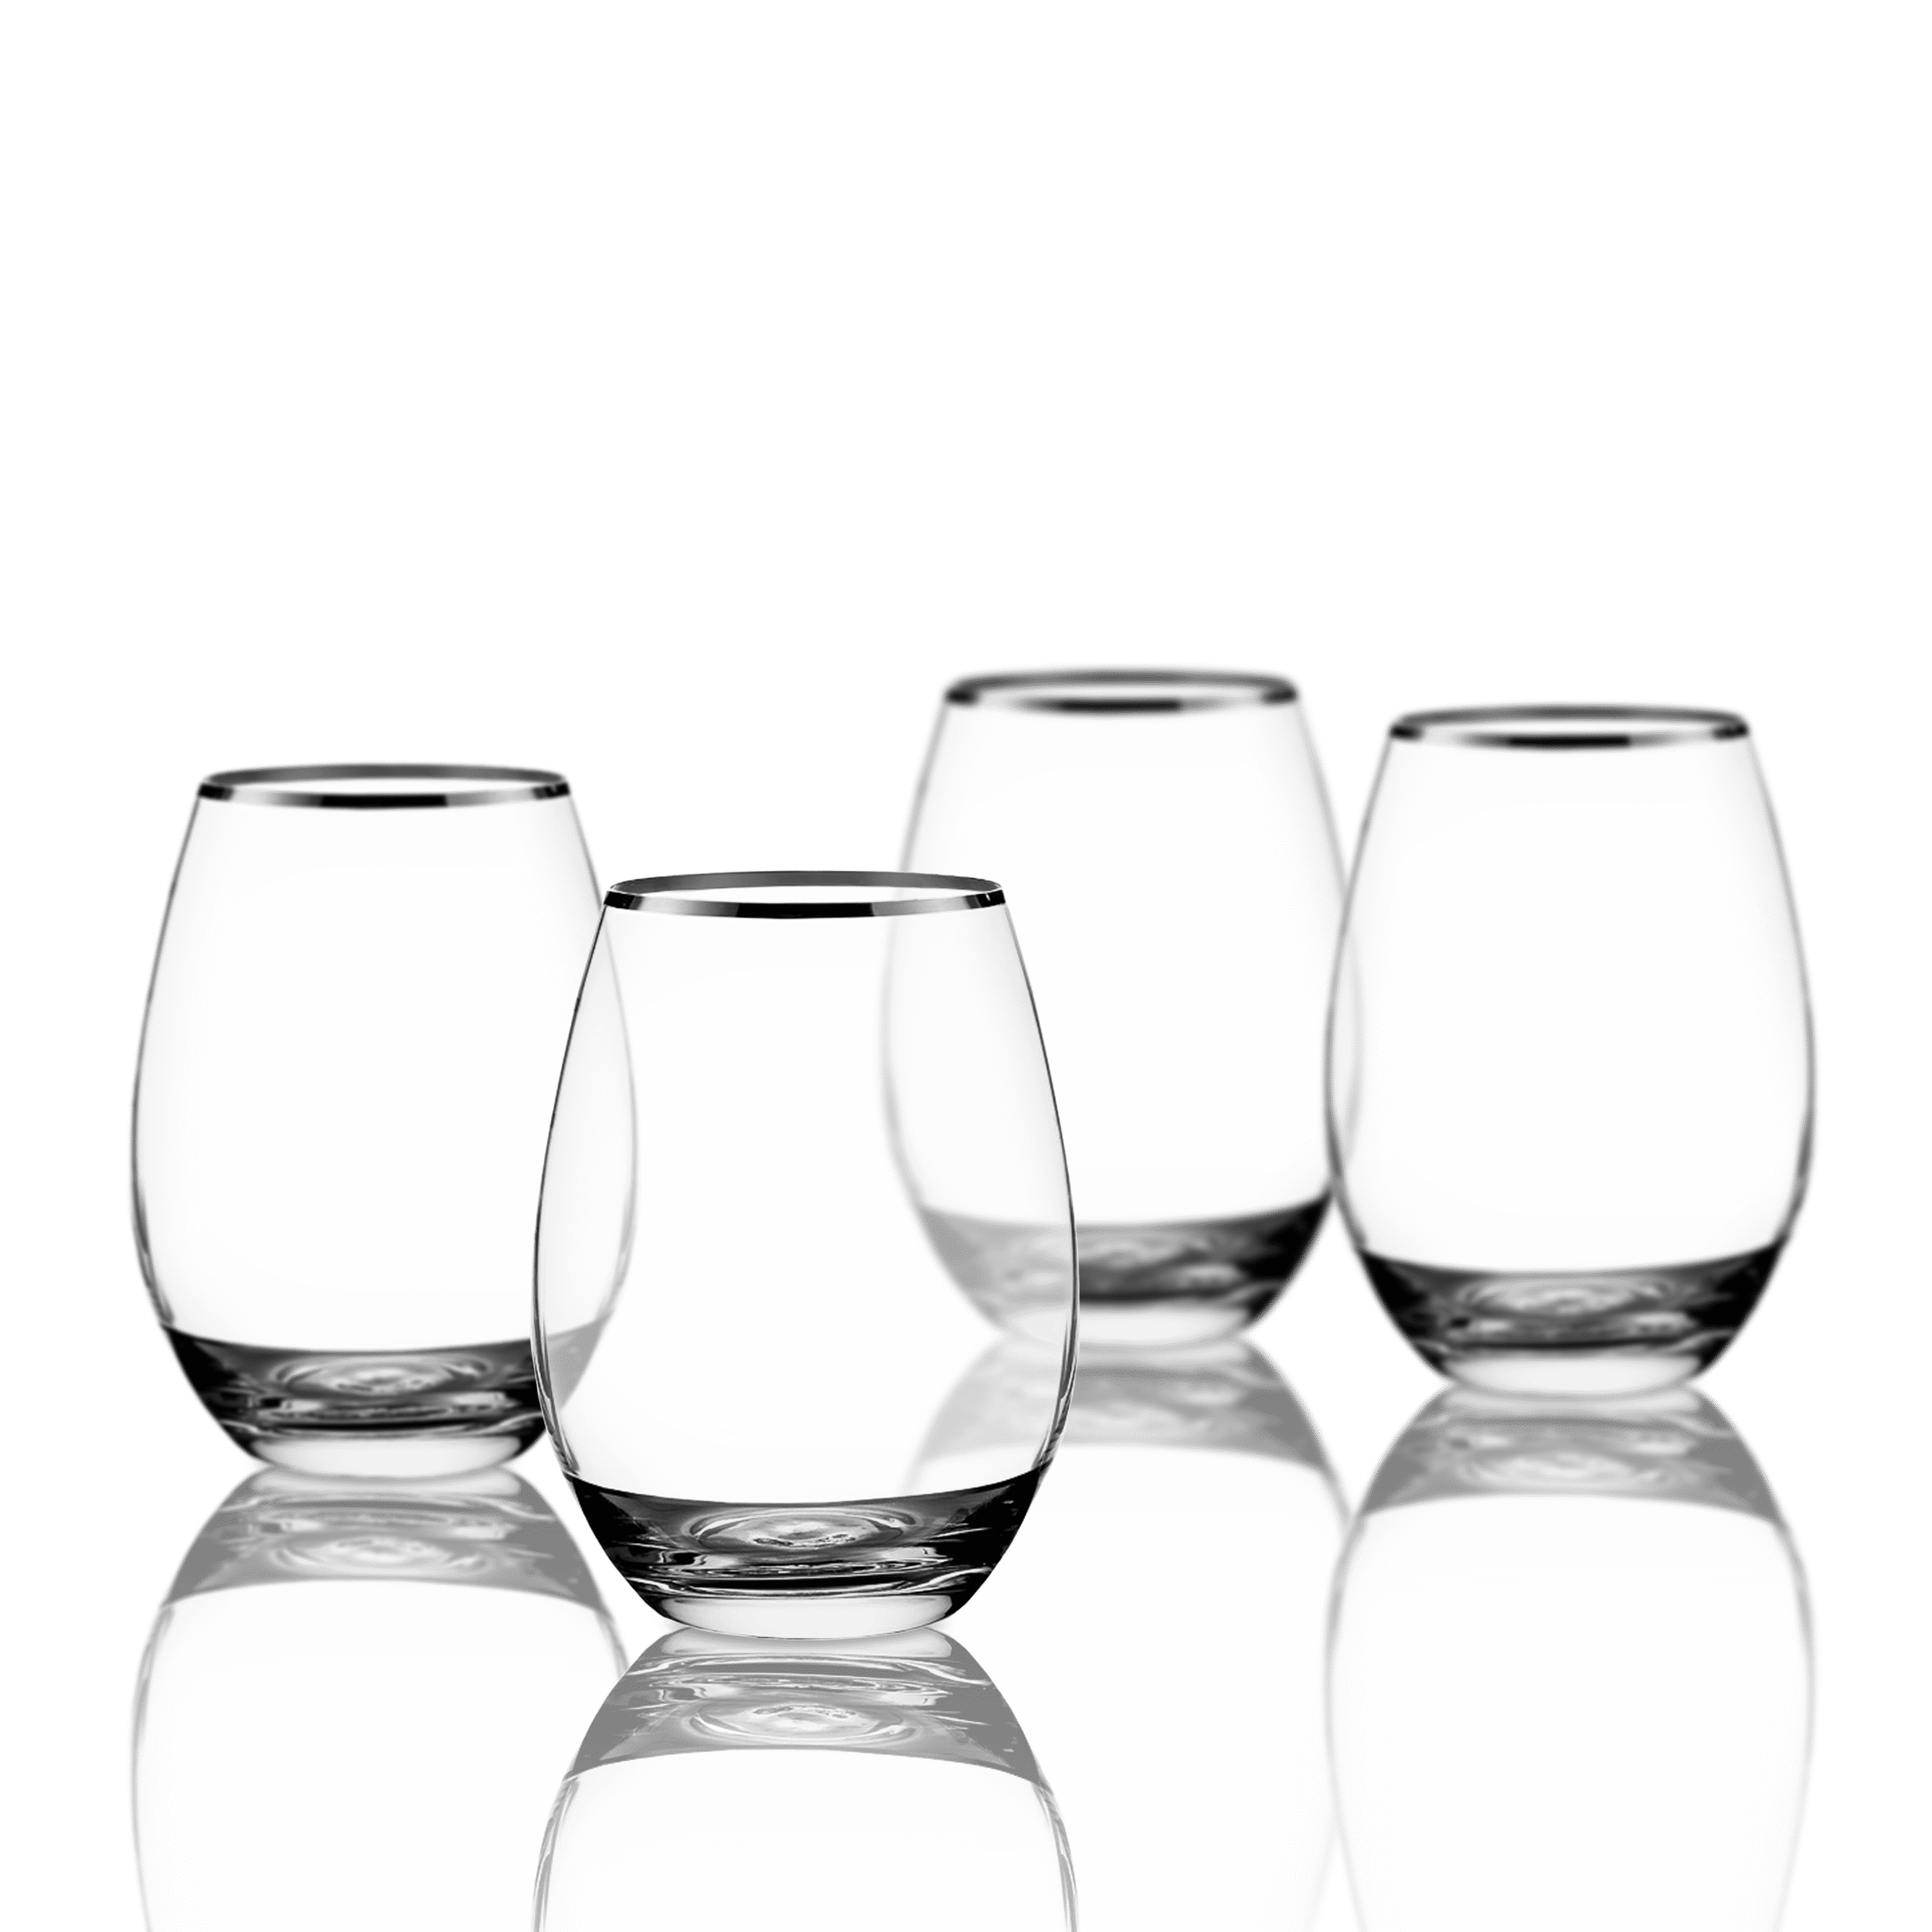 Better Homes and Garden Stemless Wine Glasses Wilmond Set Of 4